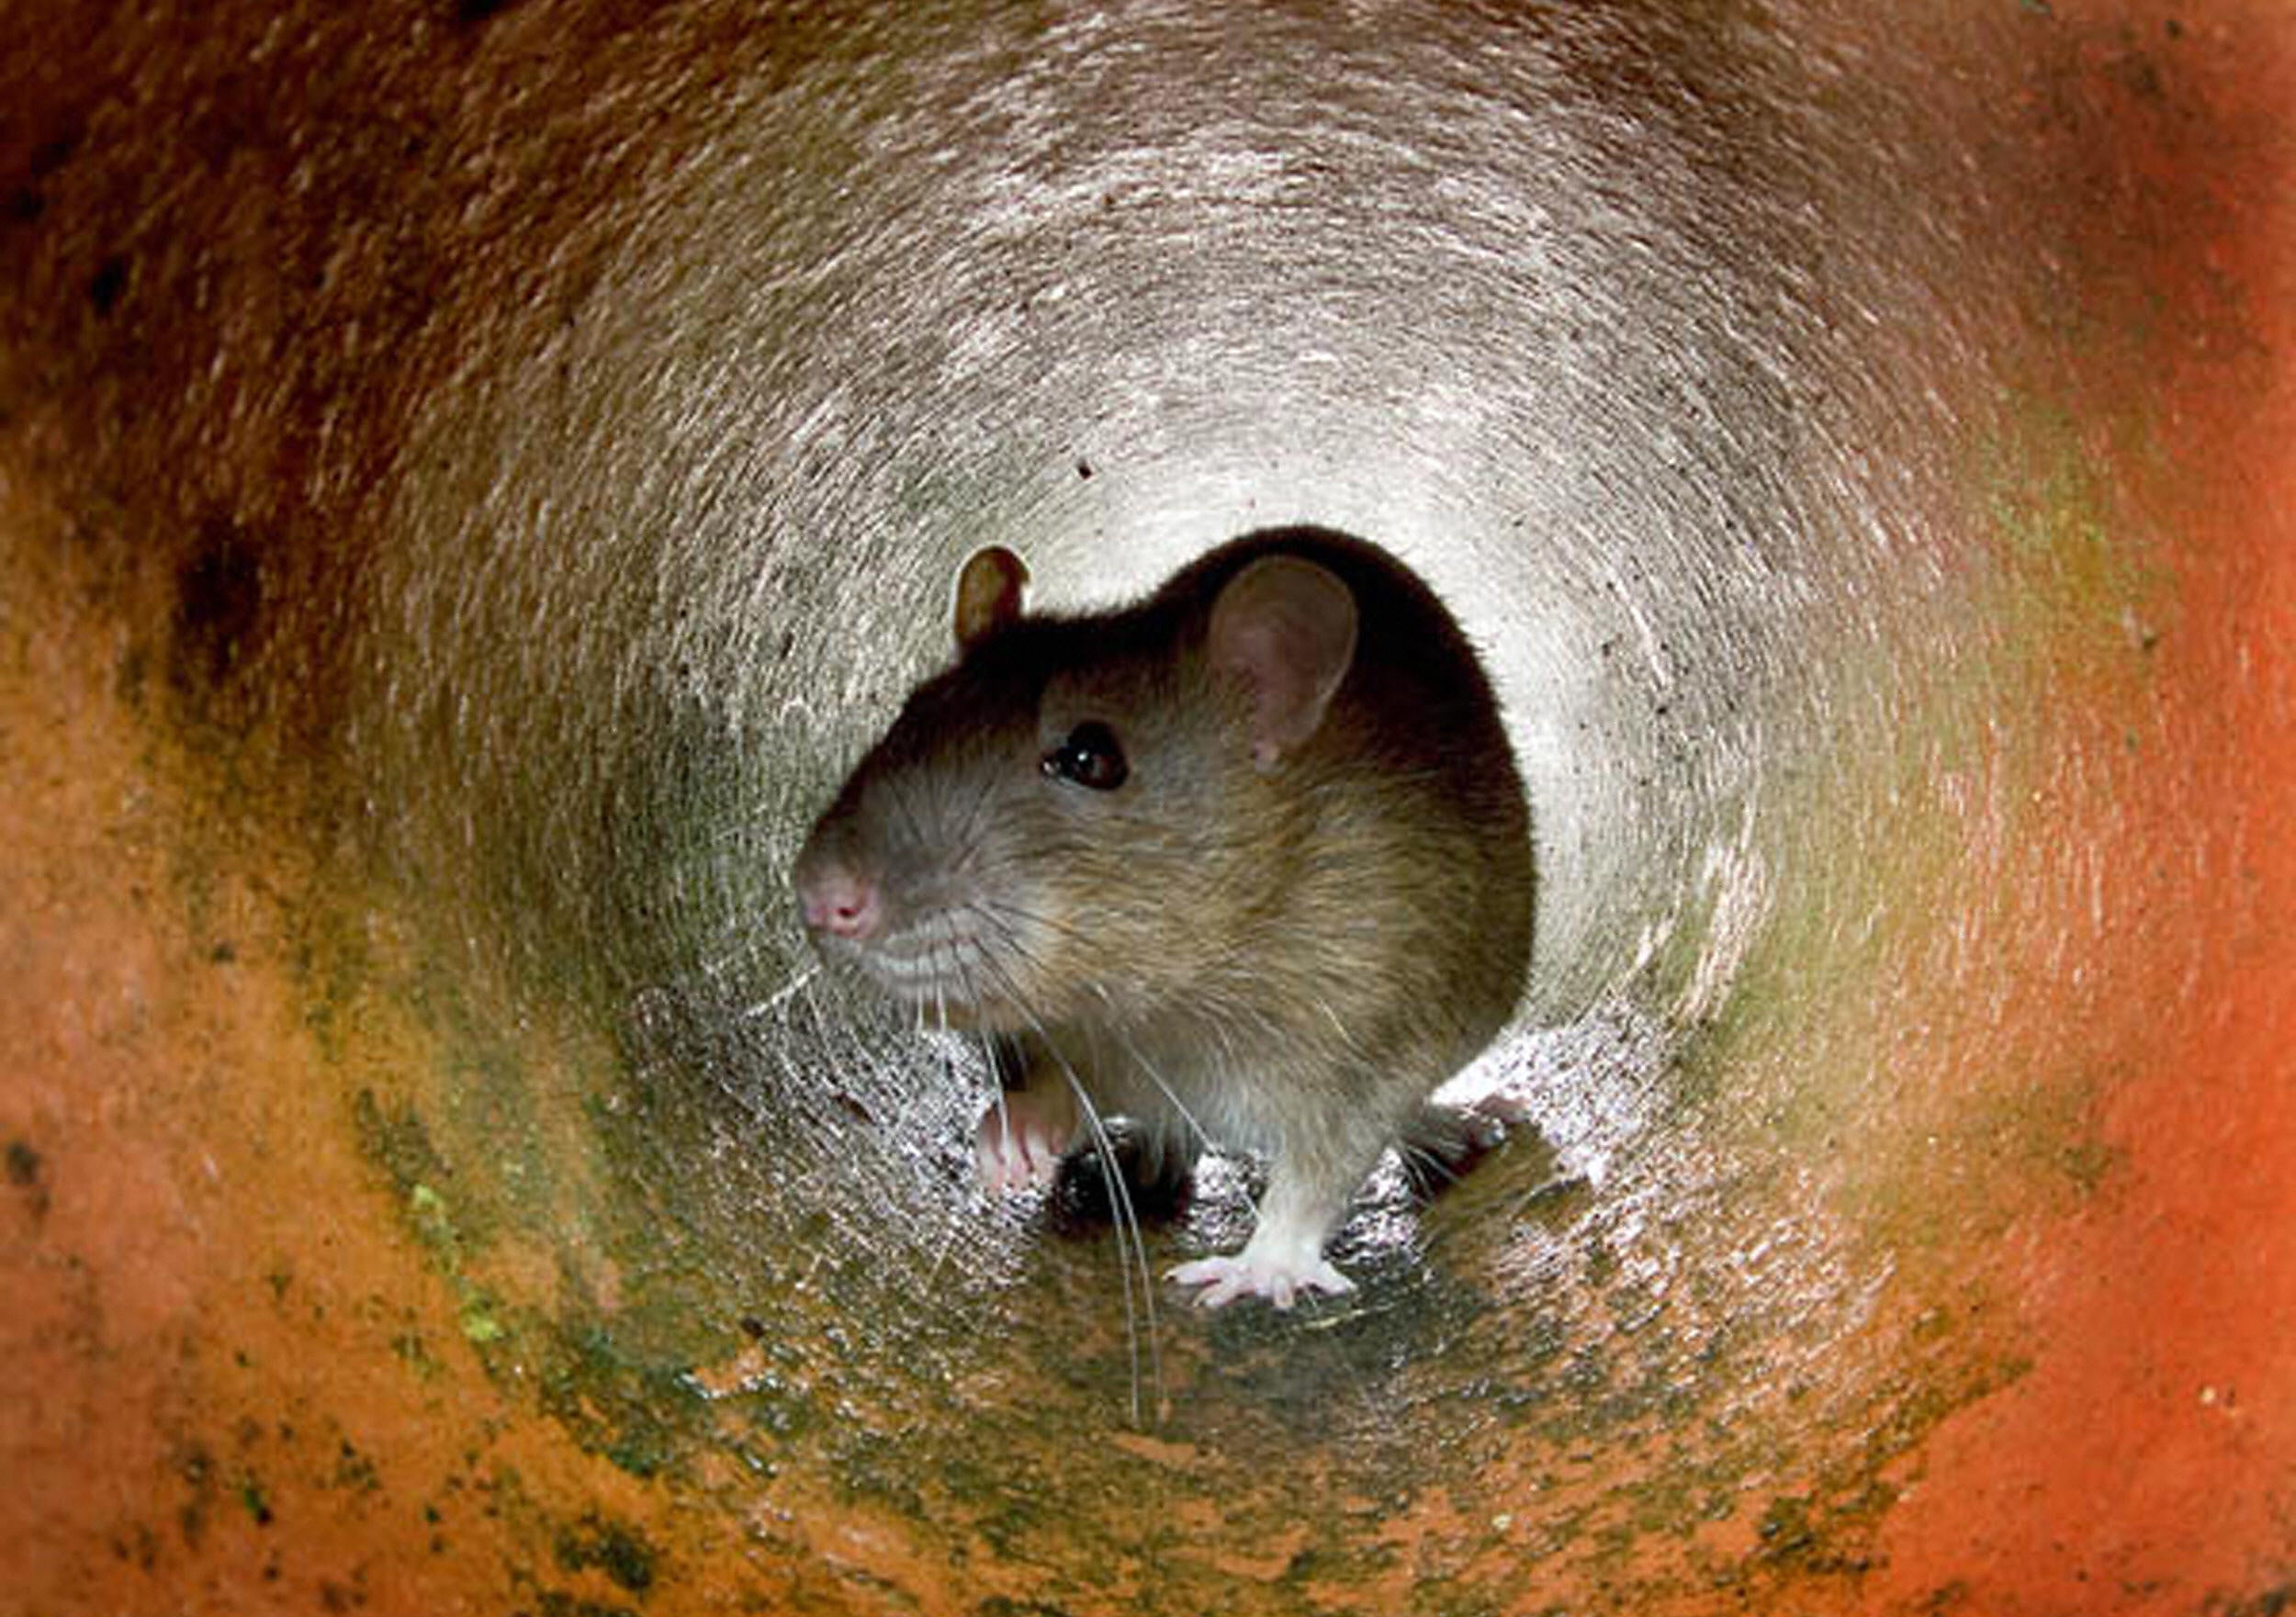 Rats have reportedly chewed through broadband wires in Devon, leaving 1,800 homes without internet connection.